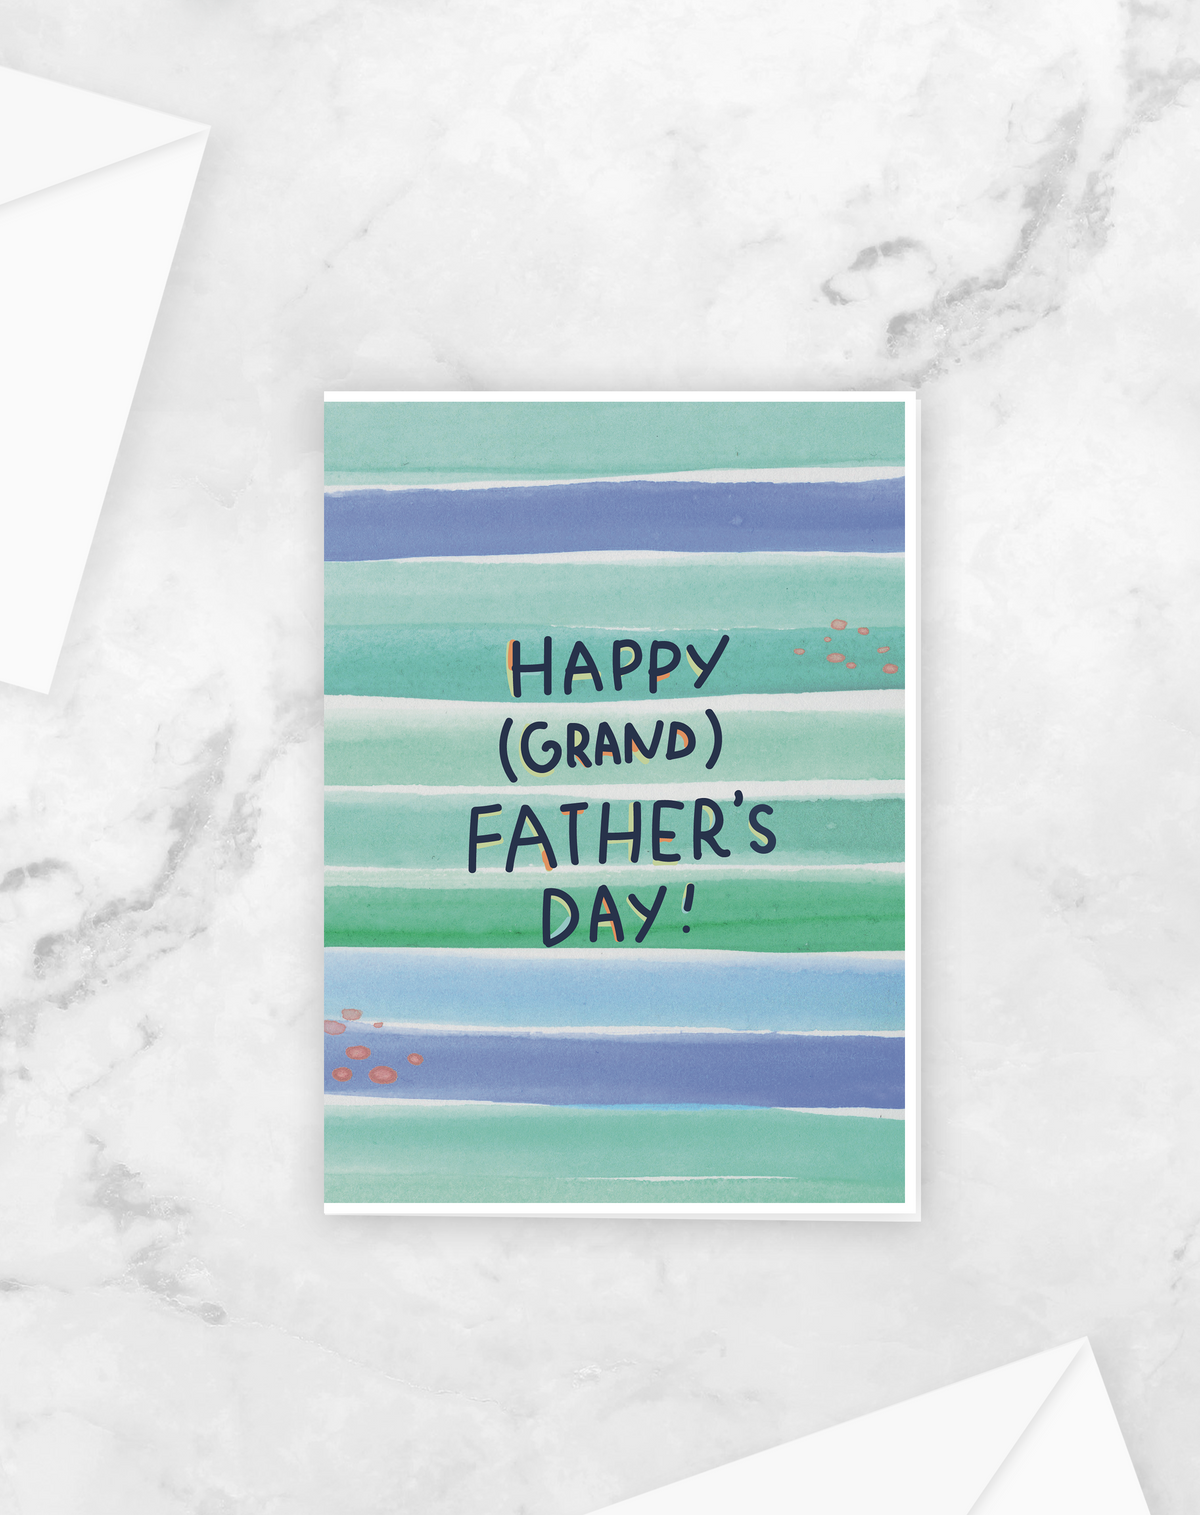 Greeting Card - Father's Day - Grandfather - Peach or Plum